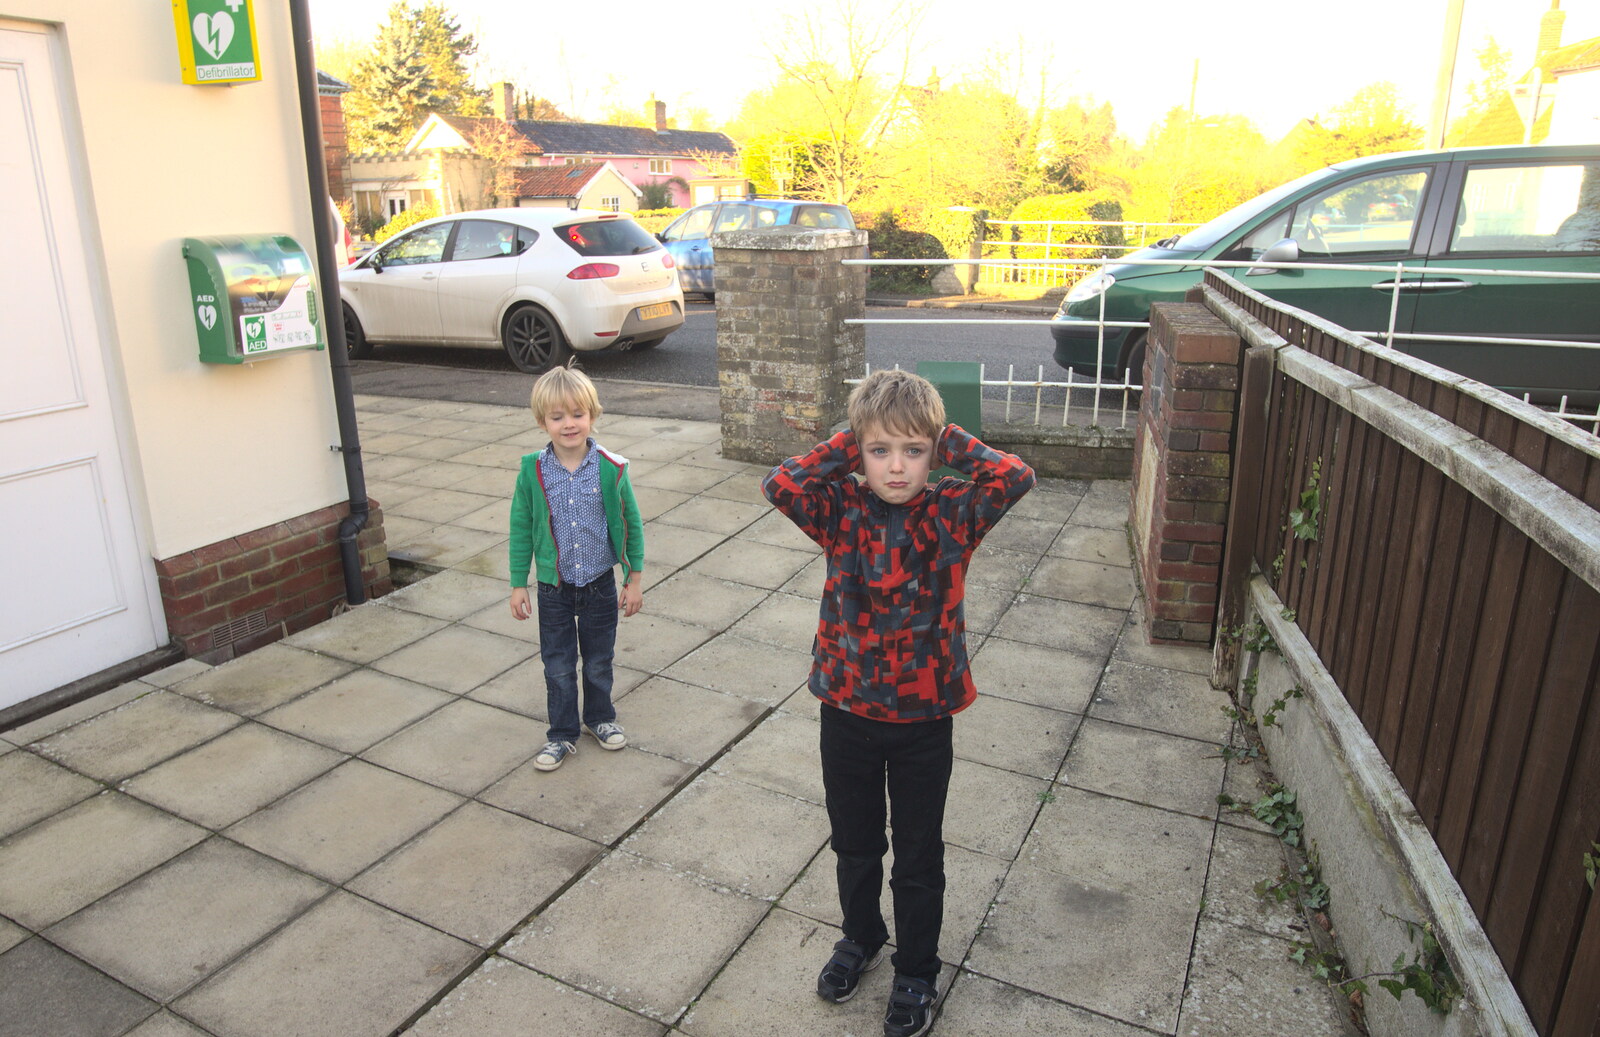 Jack's Birthday and New Windows, Brome and Brockdish, Norfolk - 4th December 2016: The boys have to leave, because Frozen